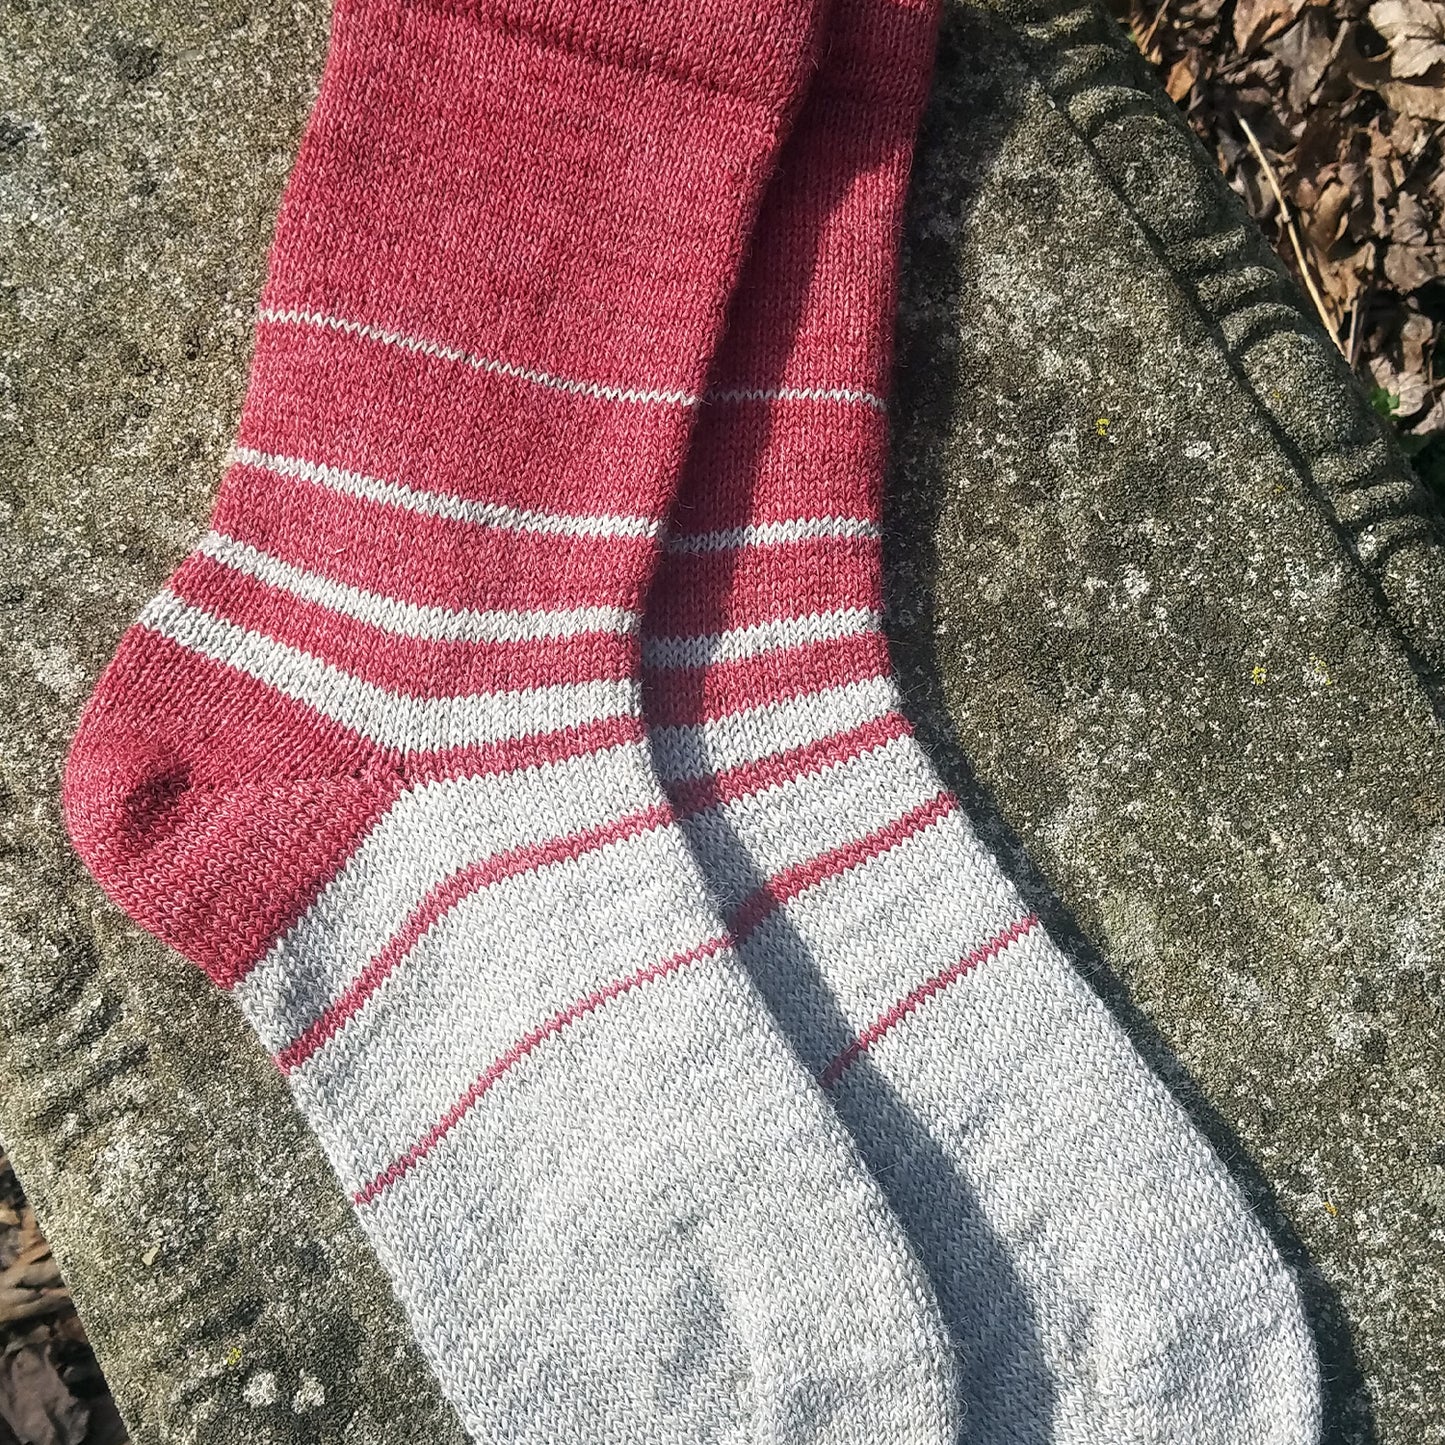 United States, Kathleen Oliver / Sweet Tree Hill Farm, Shepherd’s Socks: Ombre Stripes Duo with Red